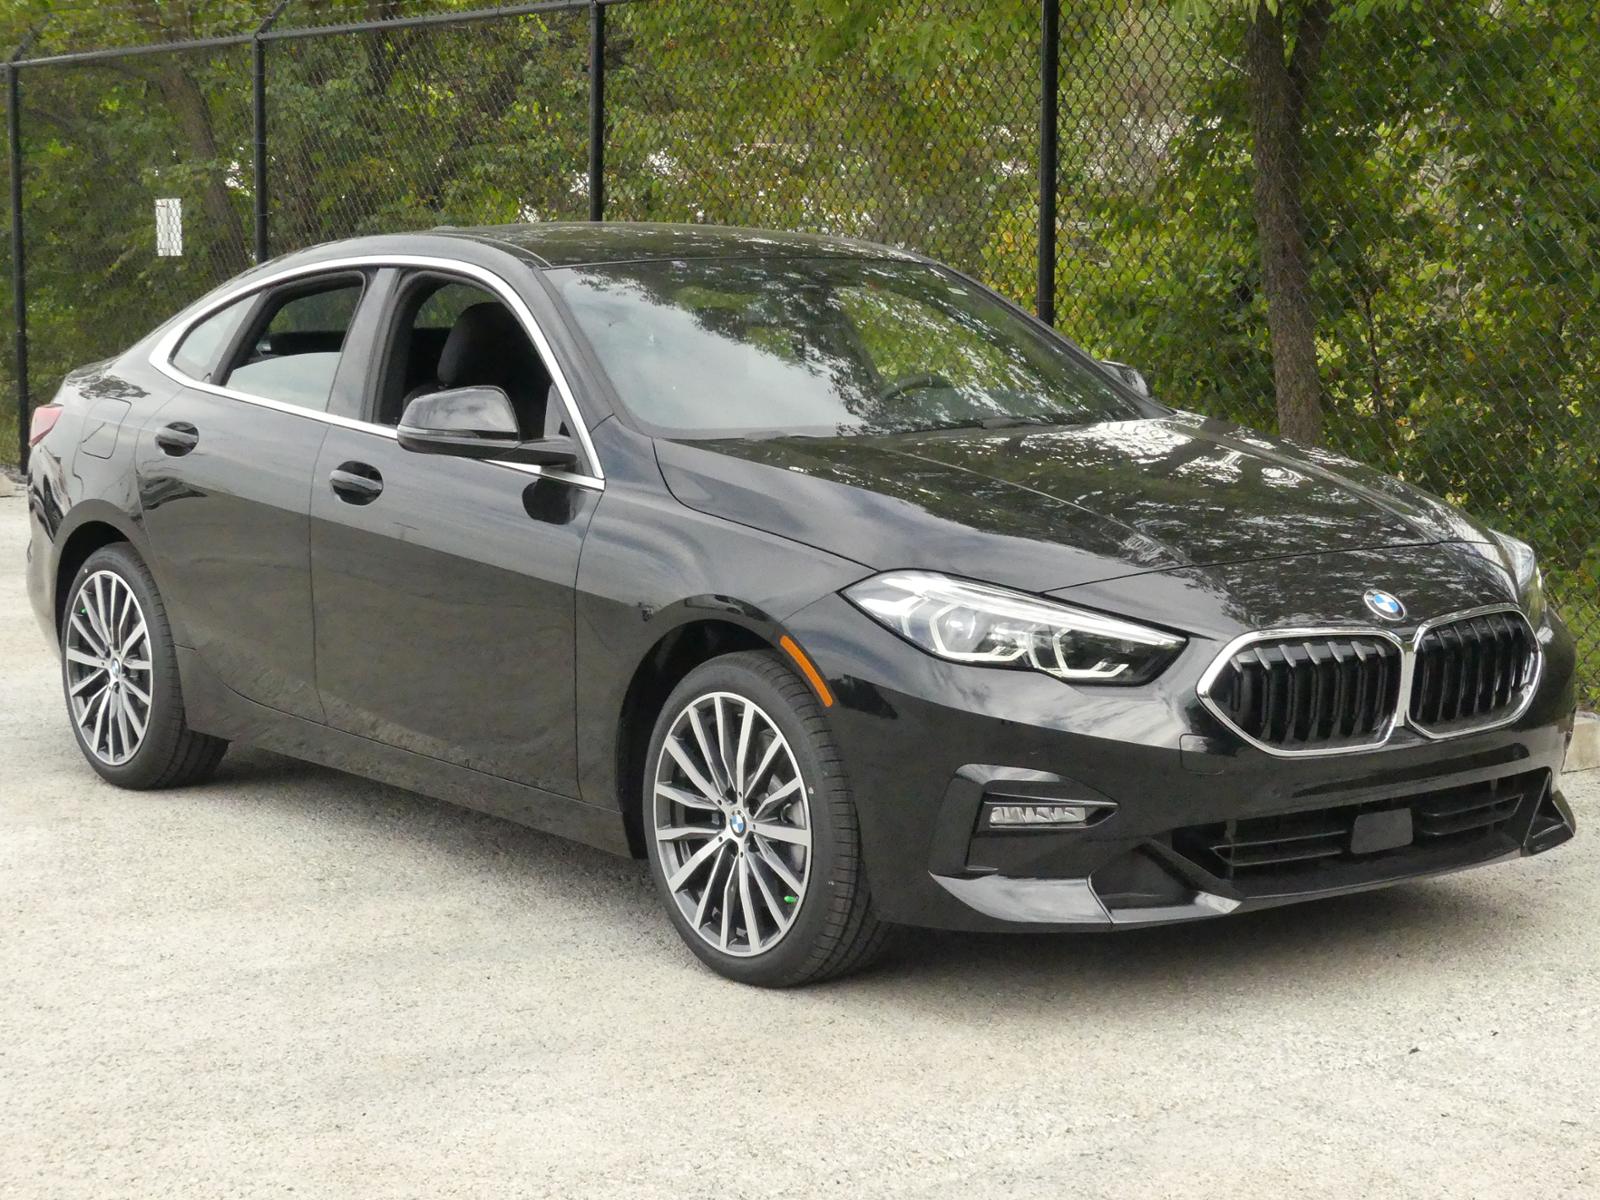 New 2021 BMW 2 Series 228i xDrive Gran Coupe 4dr Car in Owings Mills #